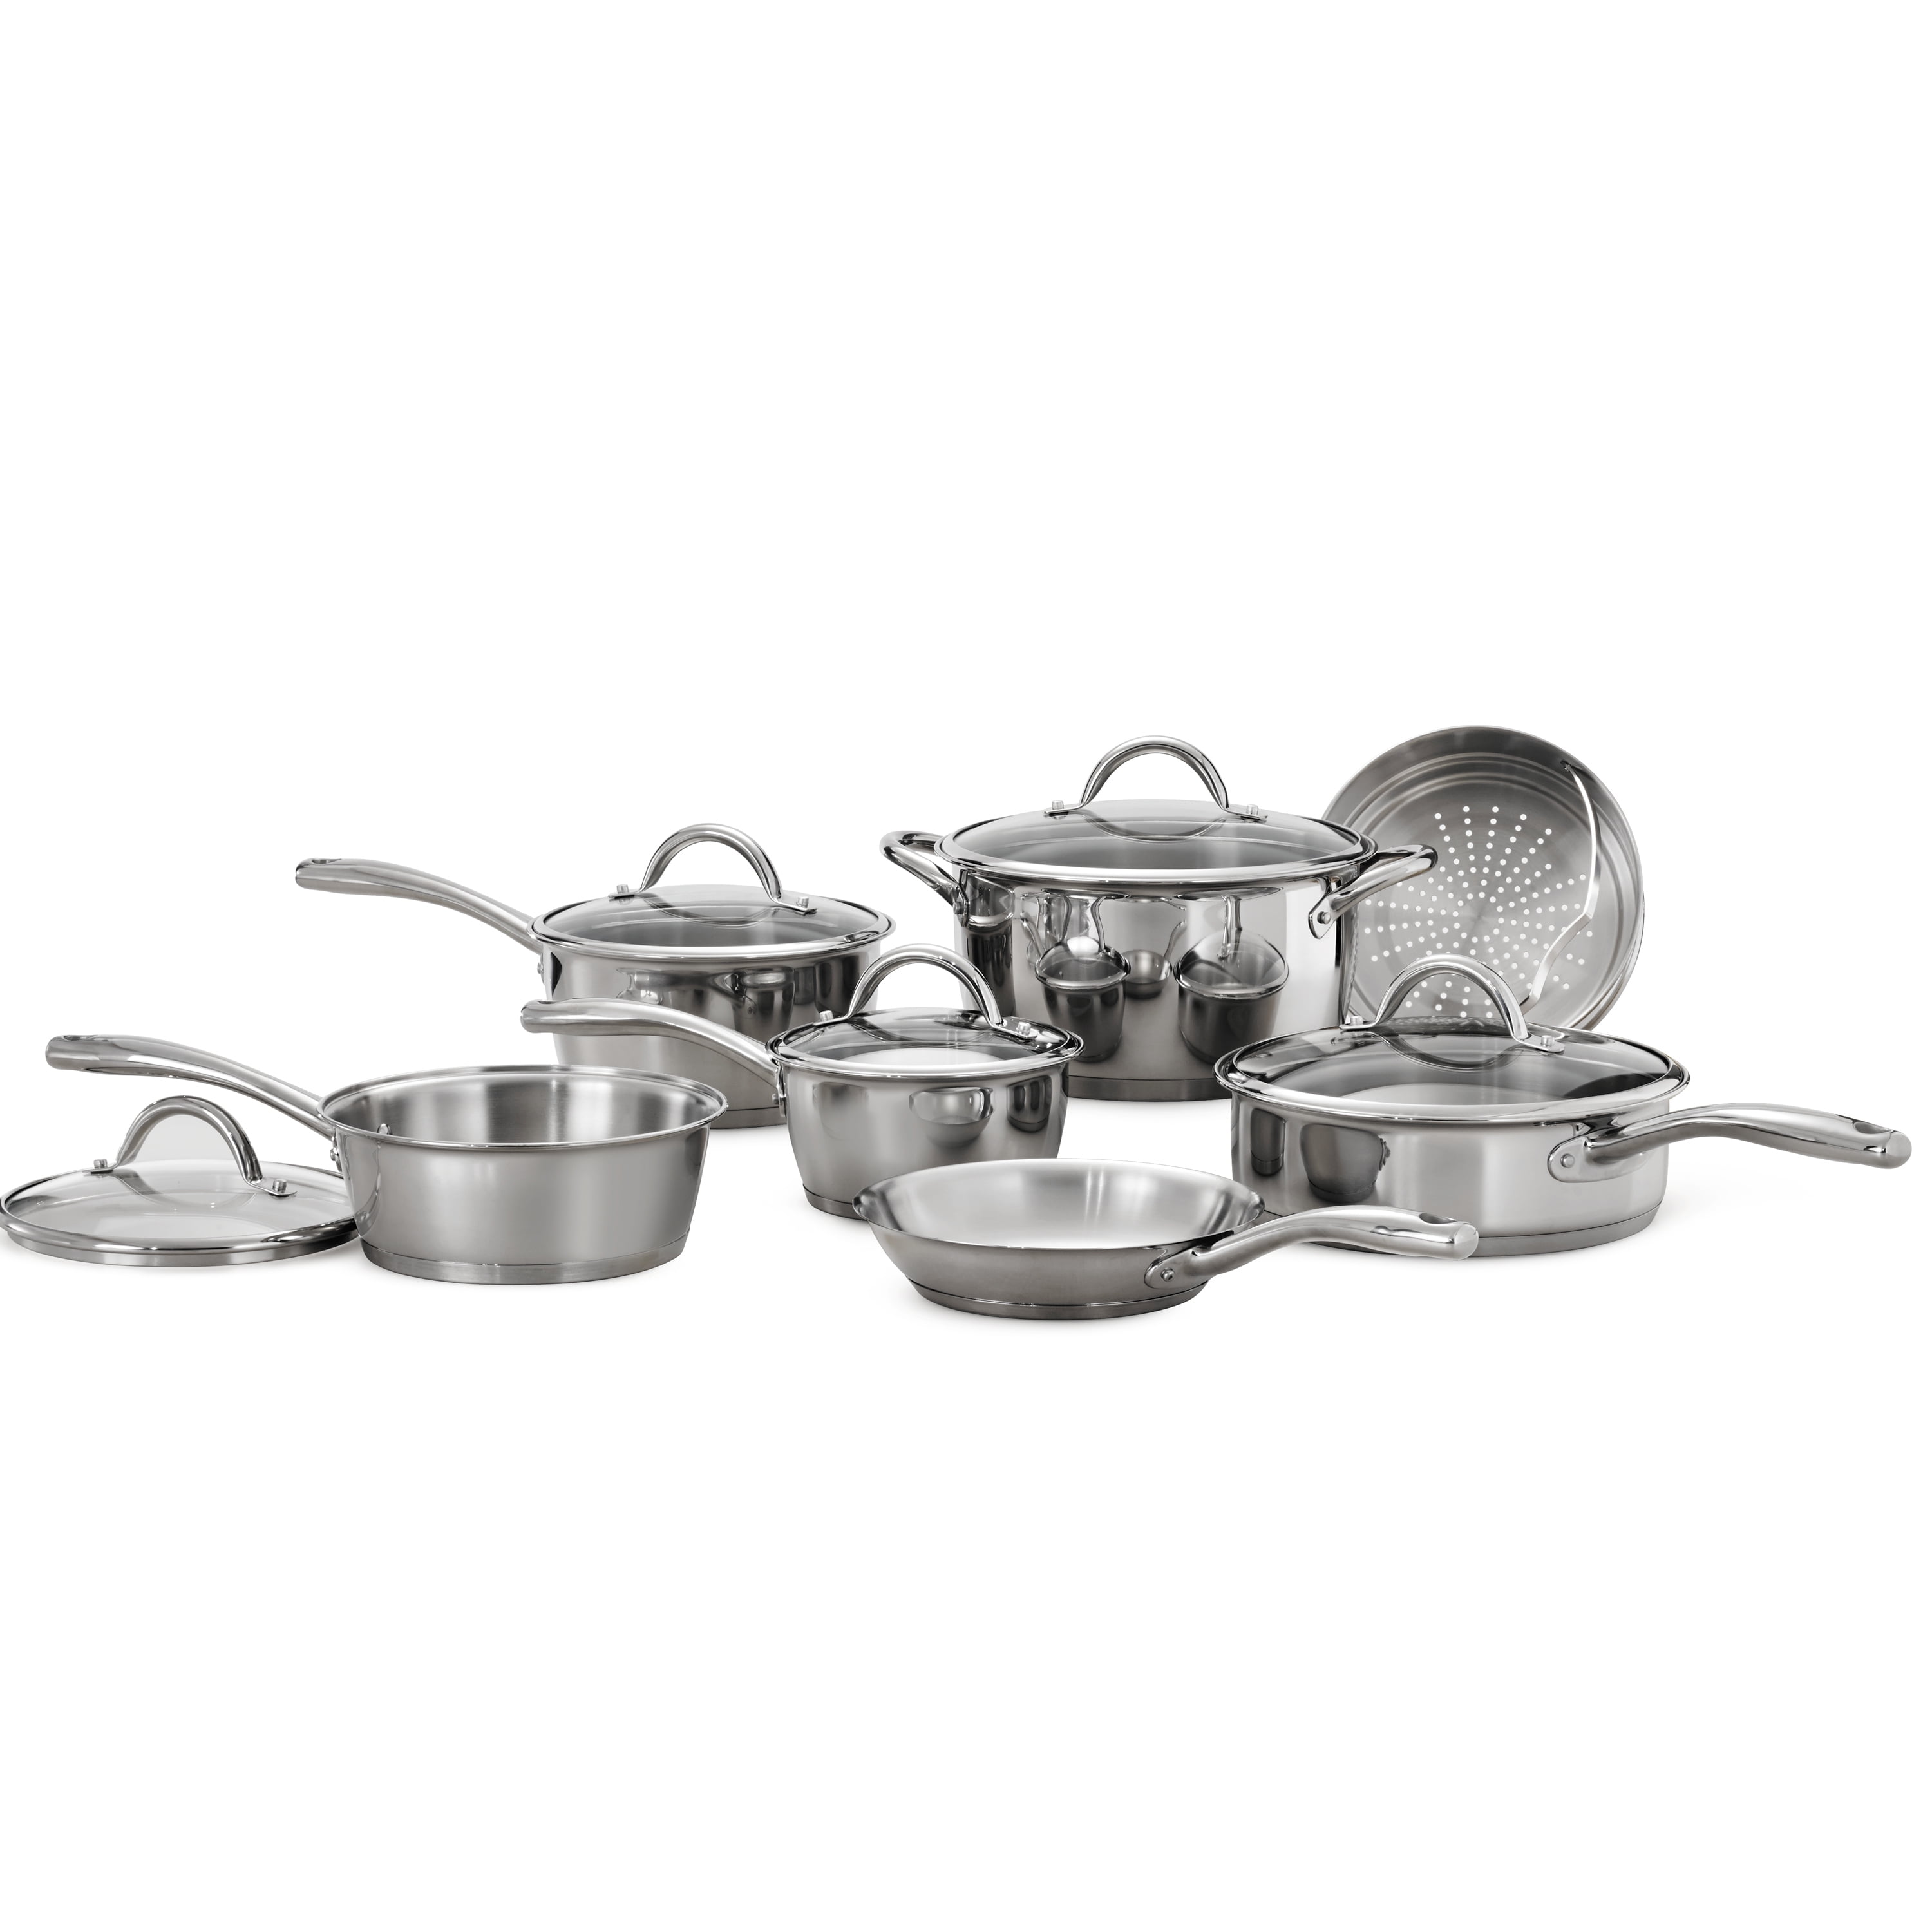 Tramontina 12-Piece Gourmet Cookware Set Stainless Steel Tri-Ply Base Cooking 